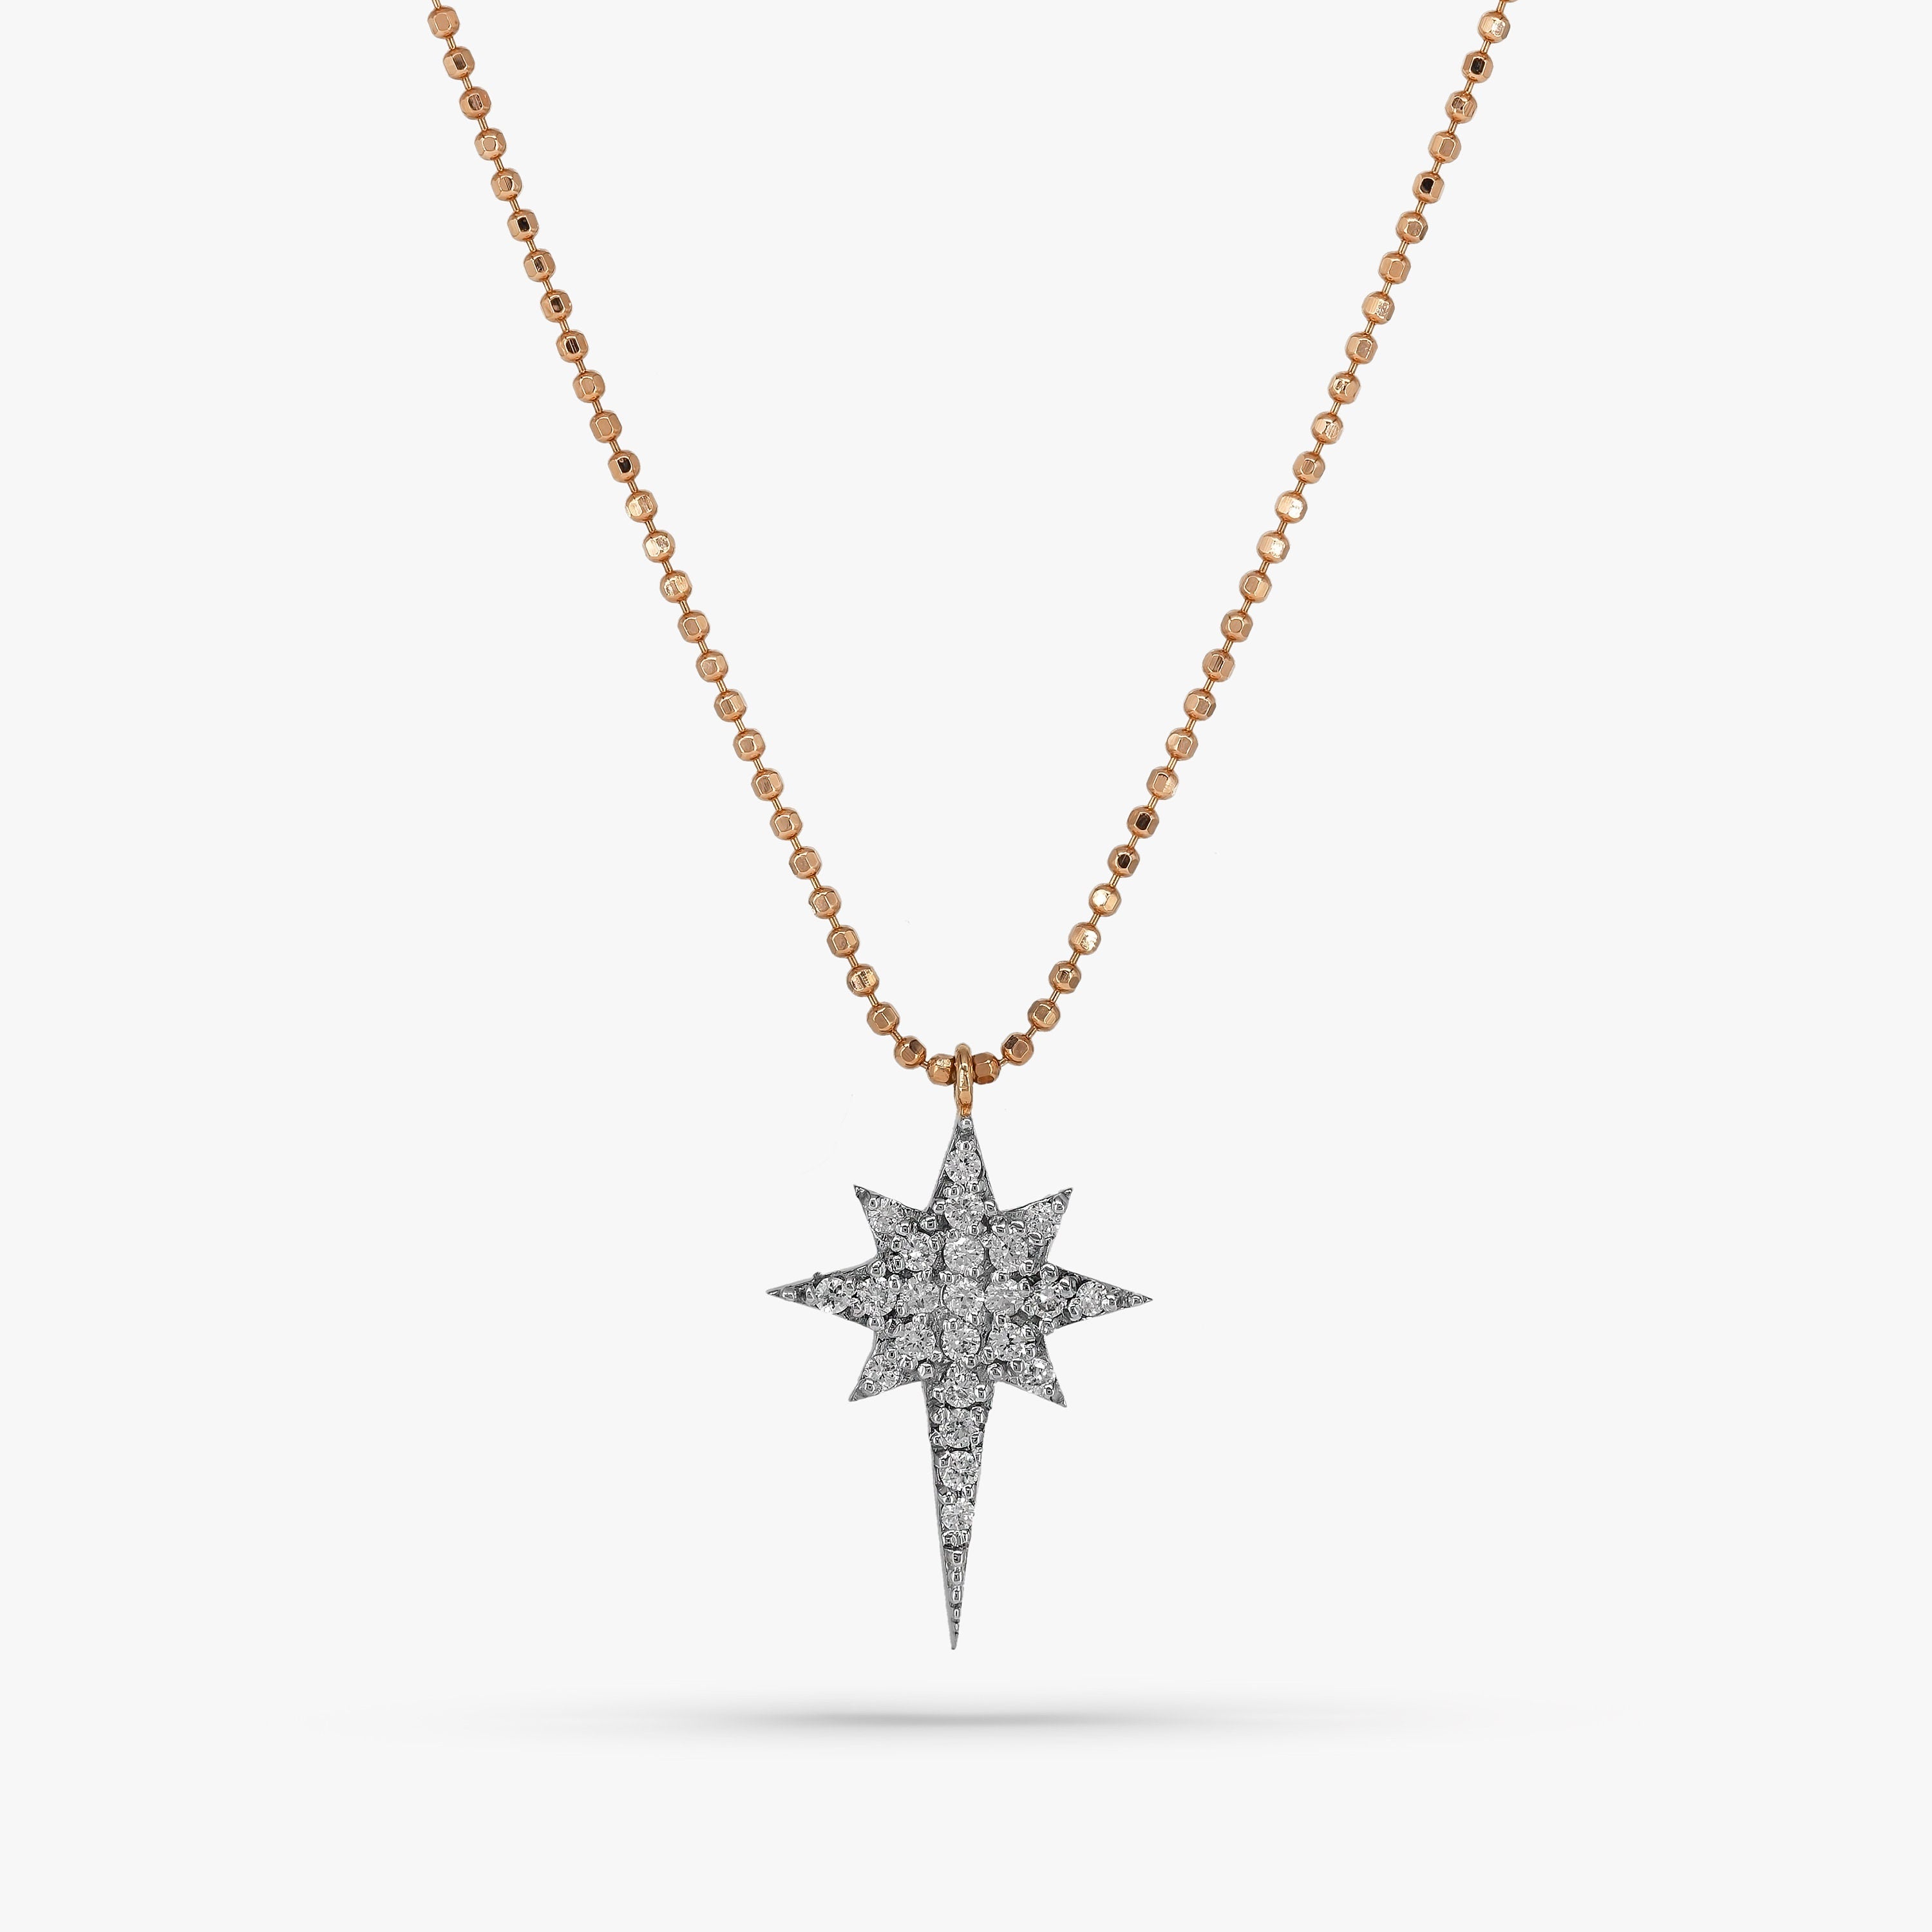 Diamond North Star Necklace With Ball Chain in 14K Gold